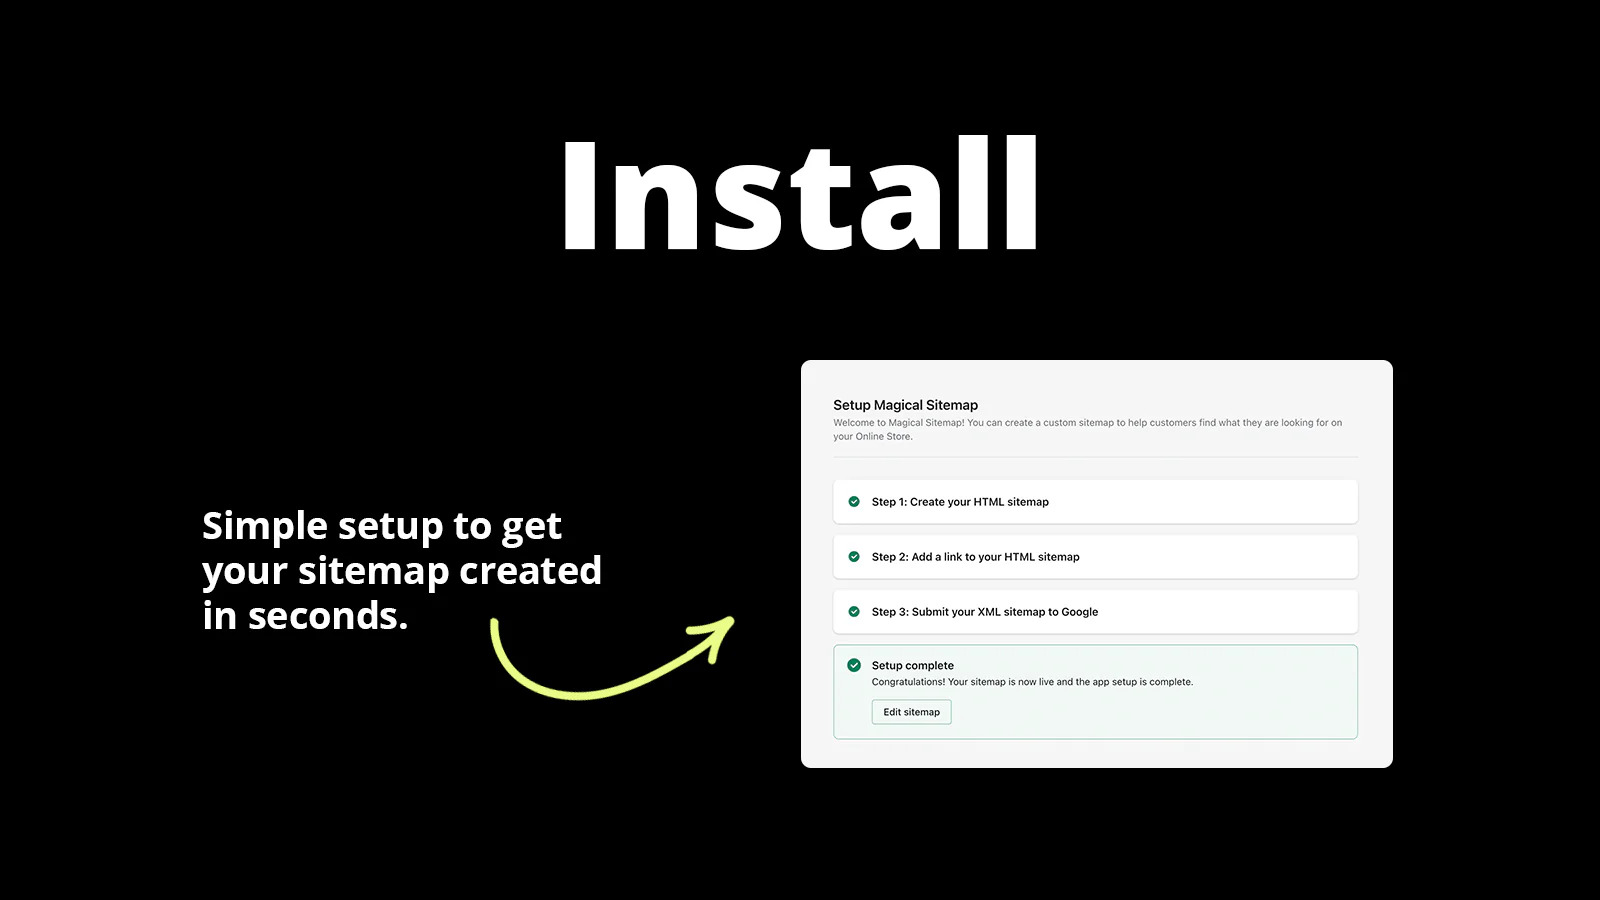 Install. Simple setup to get your sitemap created in seconds.